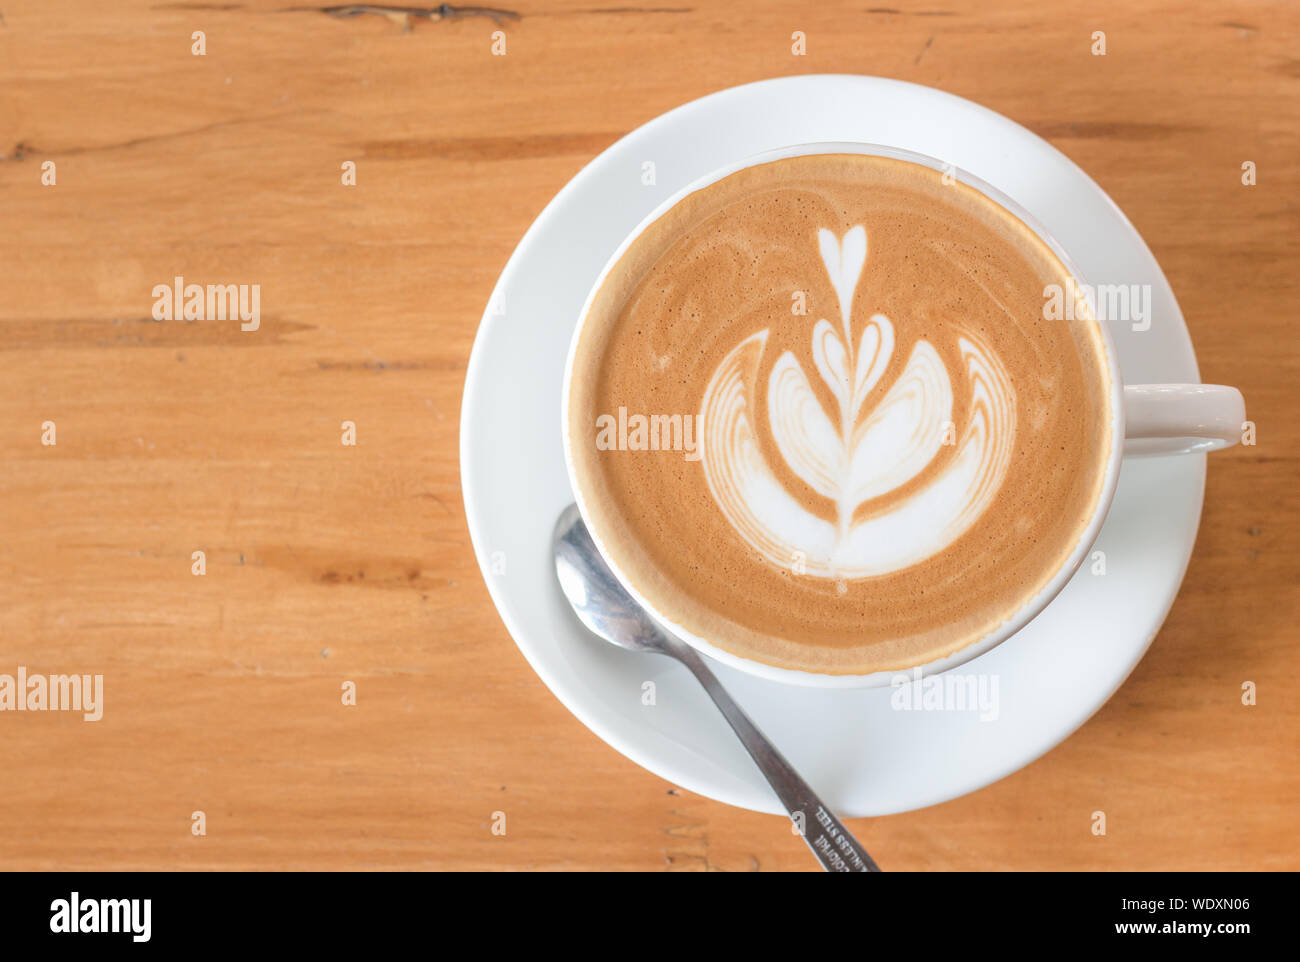 Directly Above Shot Of Cappuccino With Froth Art On Table Stock Photo